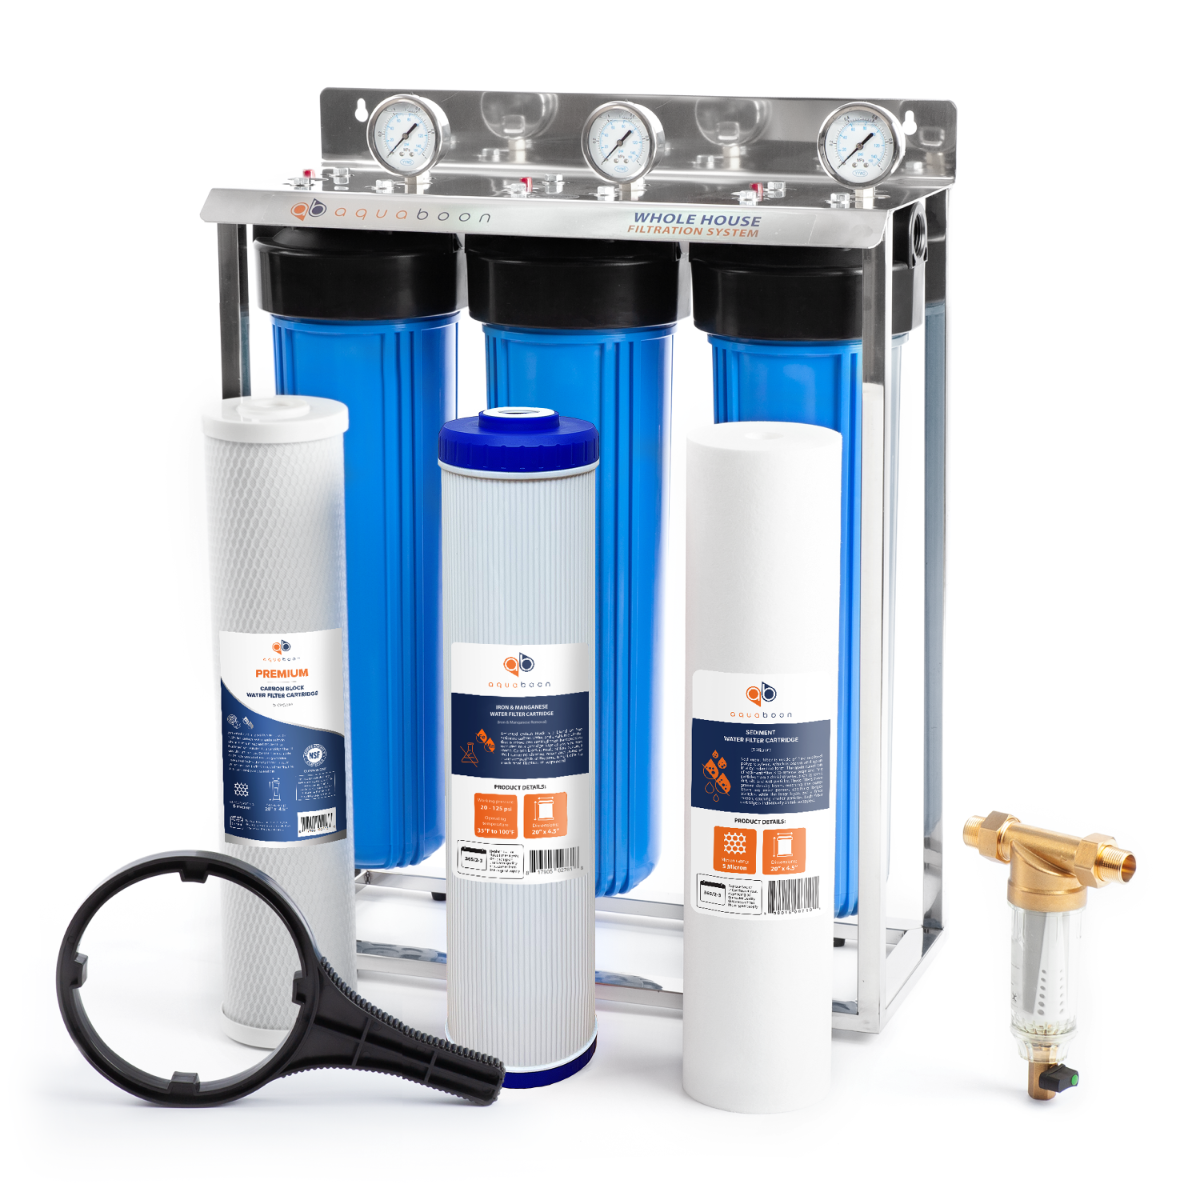 Aquaboon Whole House 3-Stage 20" Water Filtration System For Iron & Manganese Filtration (Carbon, Iron & Manganese, Sediment Filters), Stainless Steel Stand